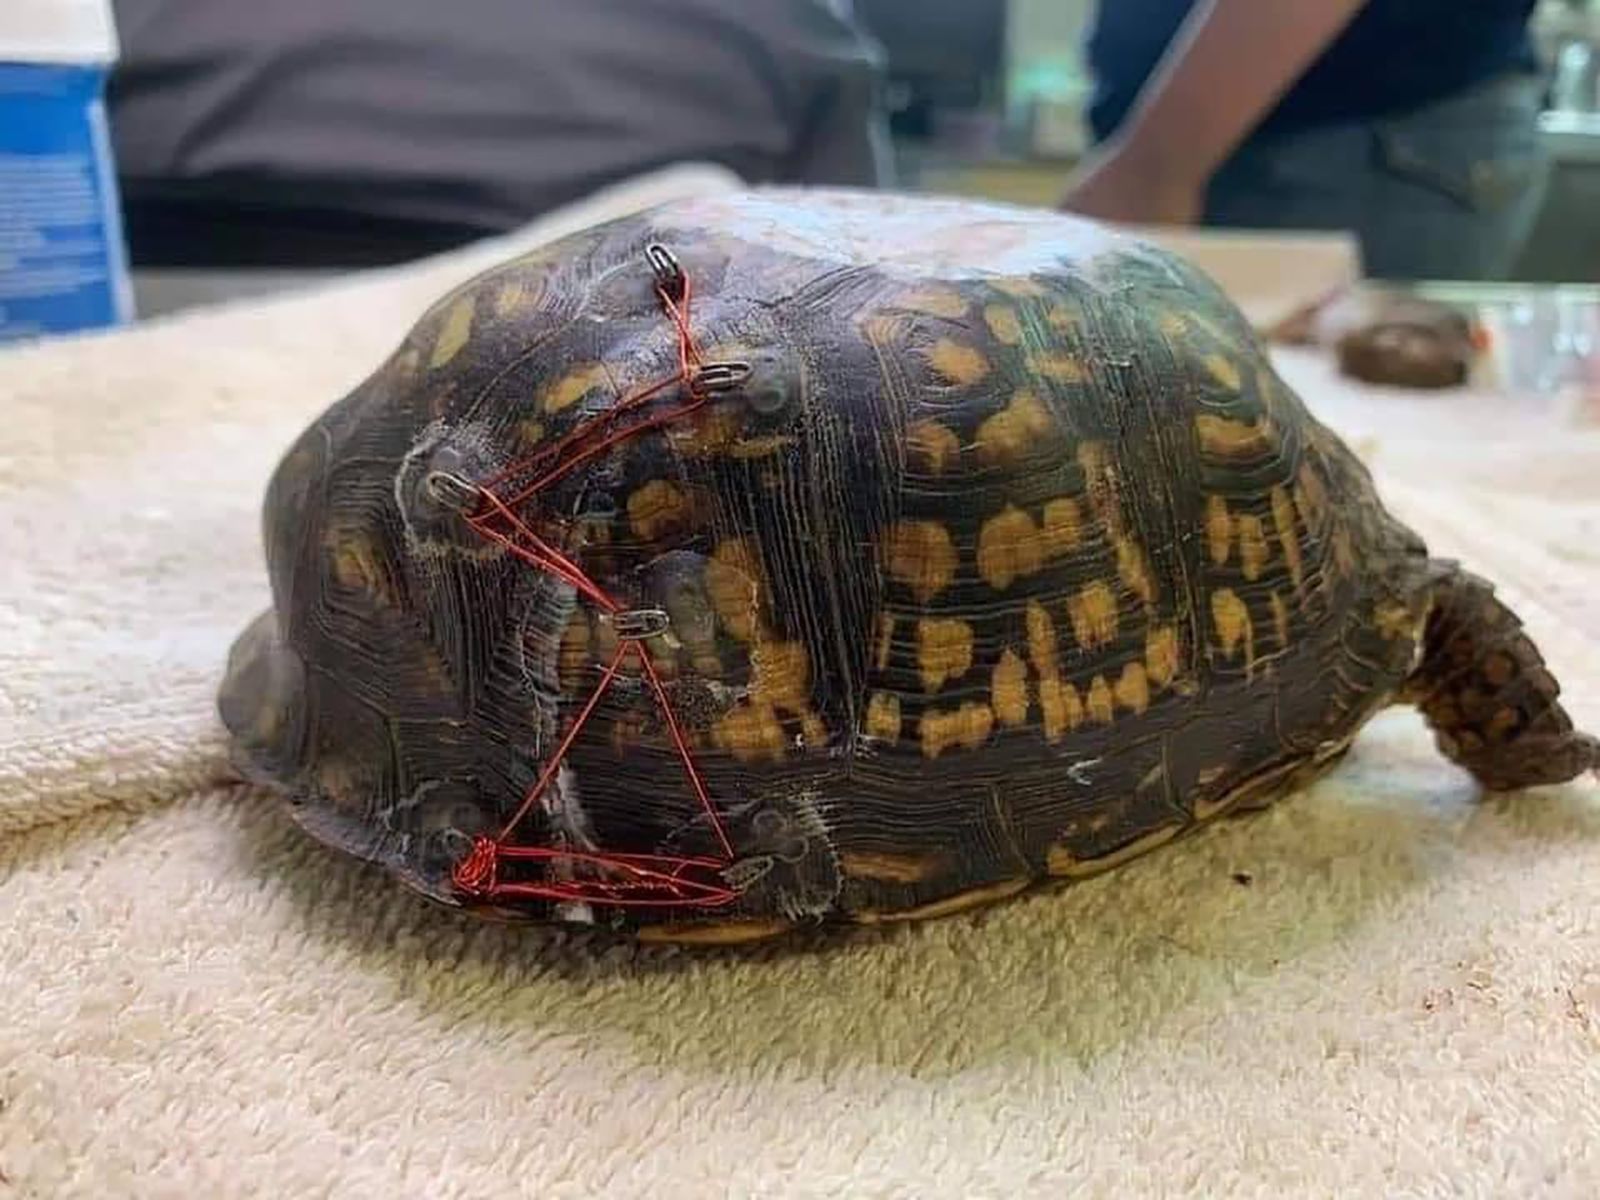 Sometimes, all it takes to save an injured turtle is a bra. No